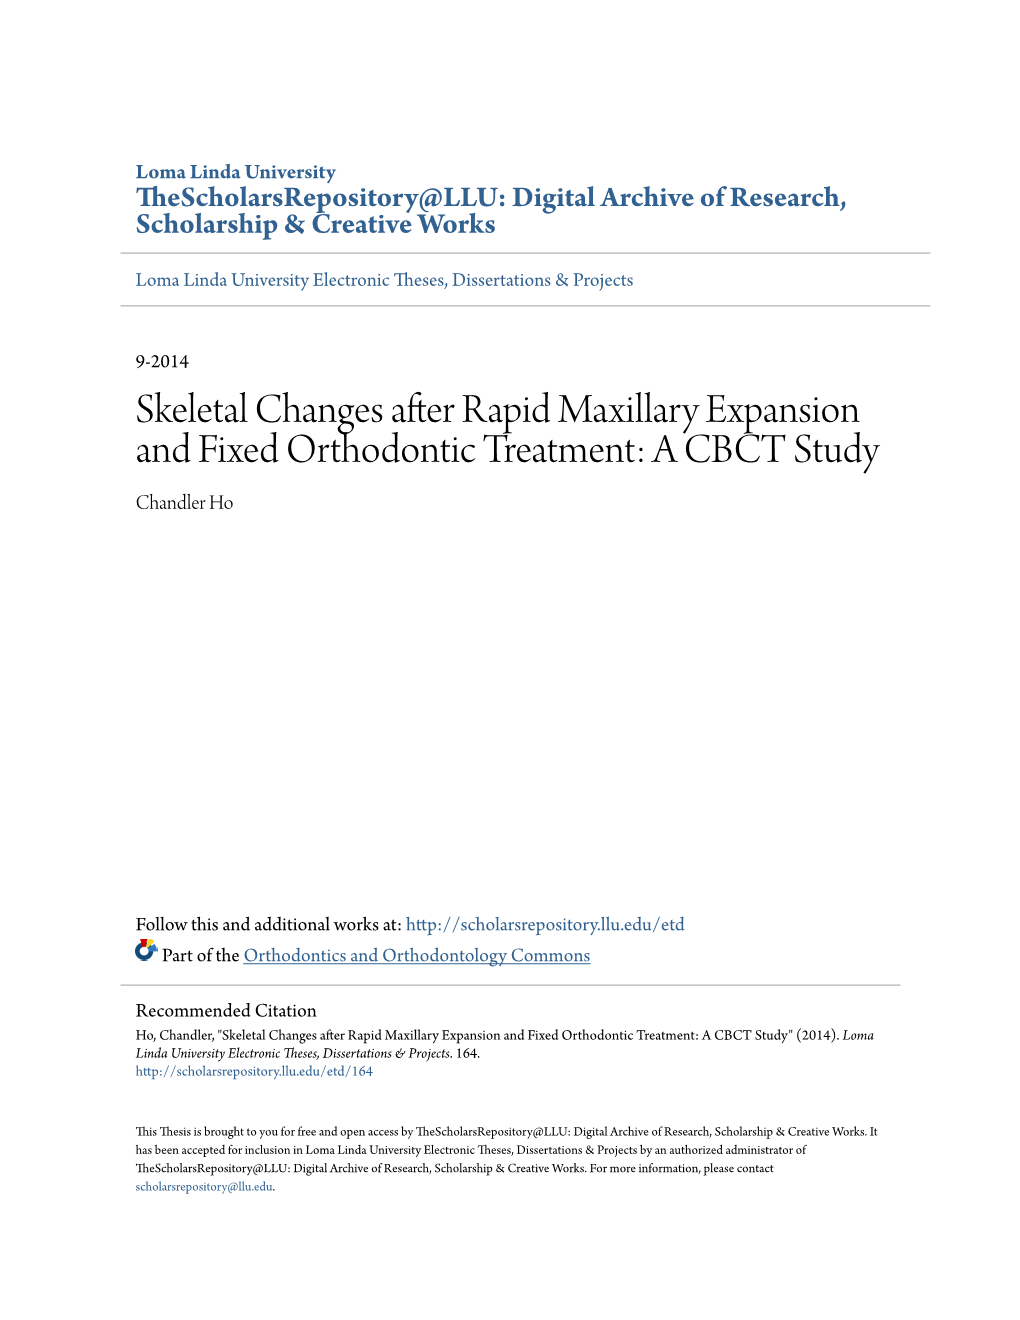 Skeletal Changes After Rapid Maxillary Expansion and Fixed Orthodontic Treatment: a CBCT Study Chandler Ho